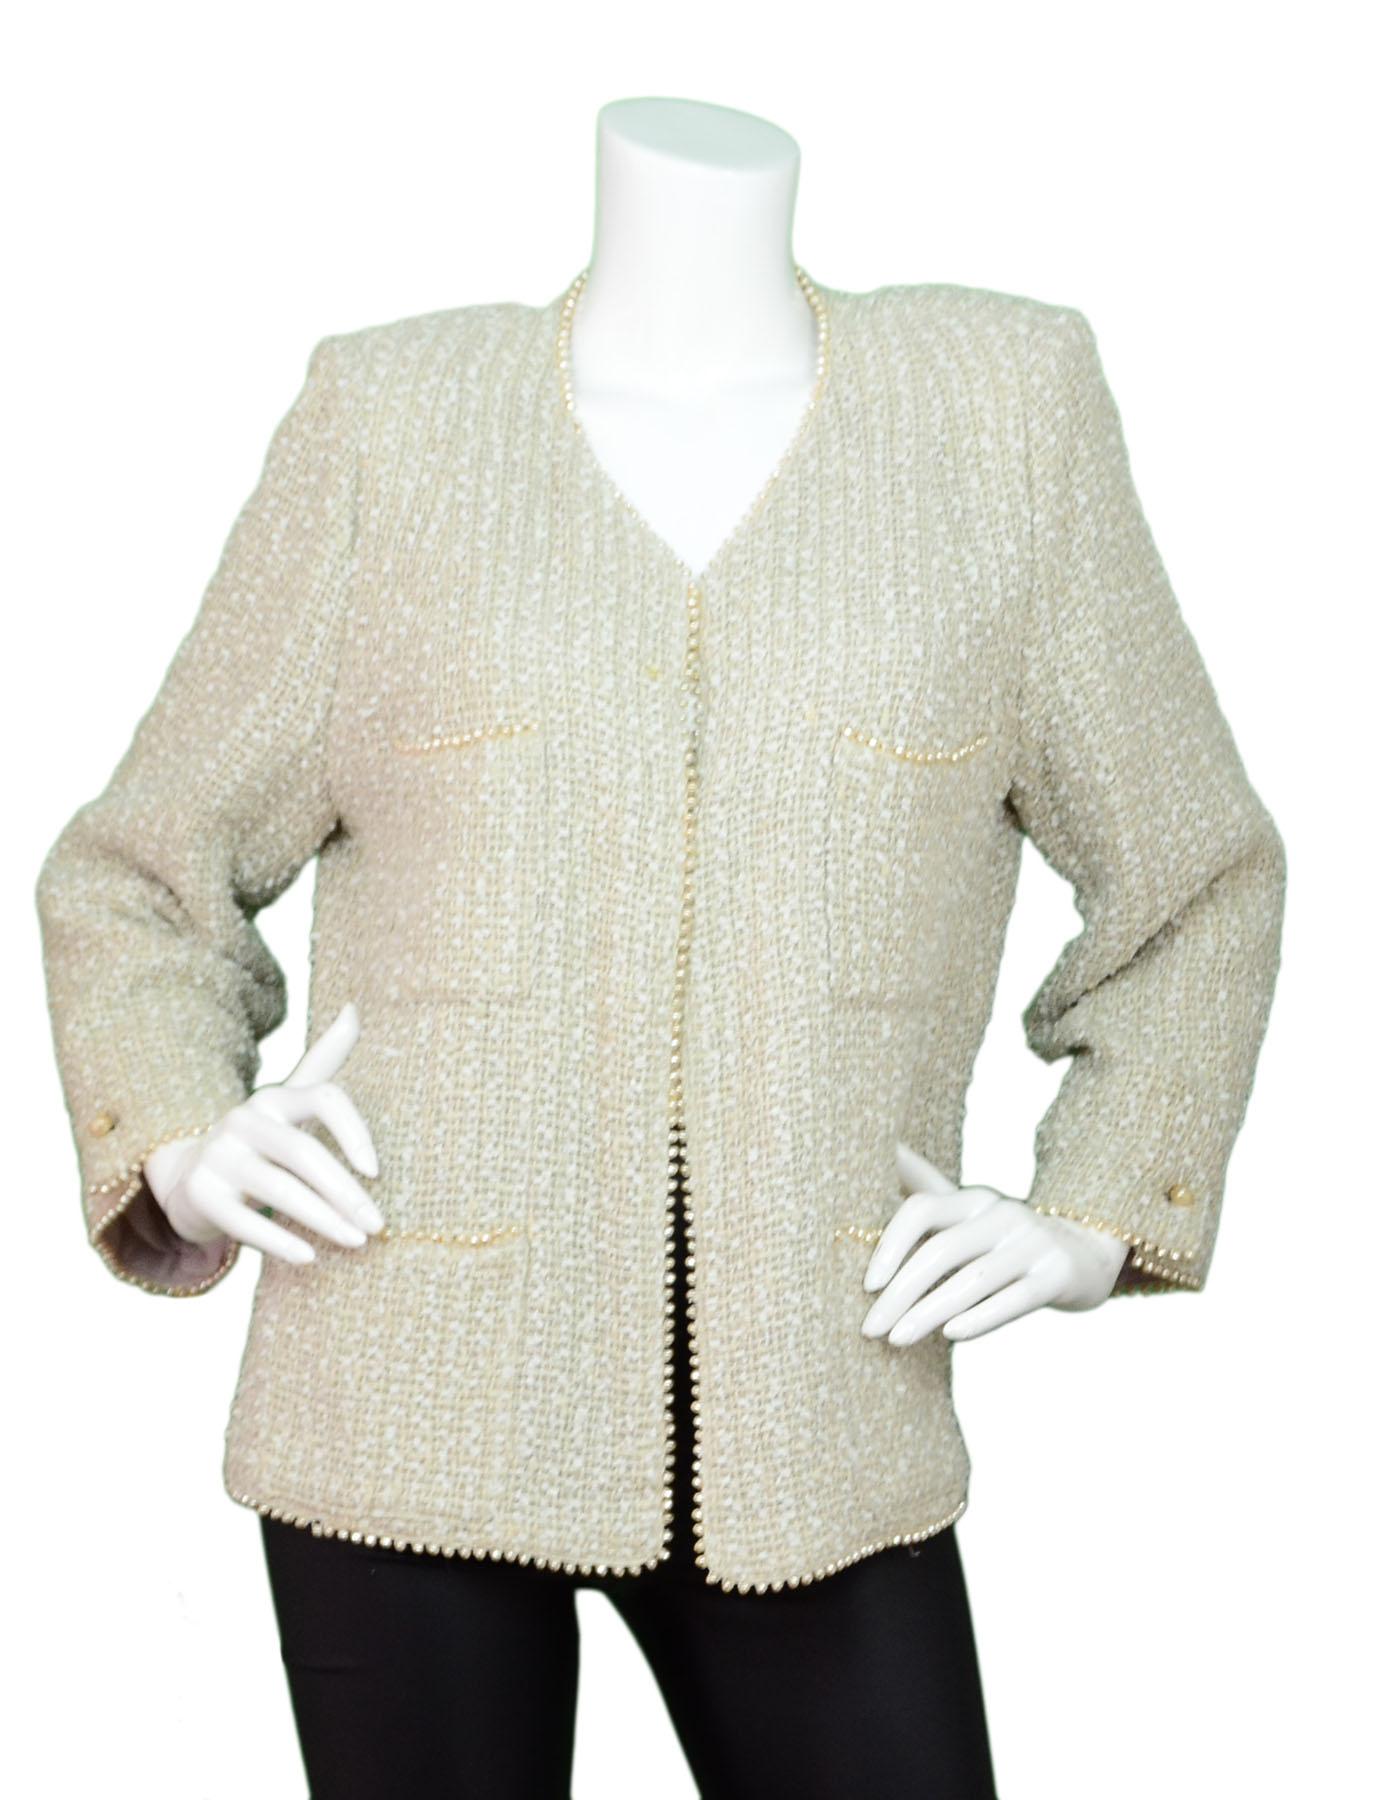 Chanel Beige Tweed Jacket with Faux Pearl Trim Sz FR48
Features faux pearl trim throughout

Made In: France
Year of Production: 1999
Color: Beige
Composition: 44% cotton, 27% wool, 14% nylon, 12% rayon, 3% linen
Lining: Beige wool
Closure/Opening: